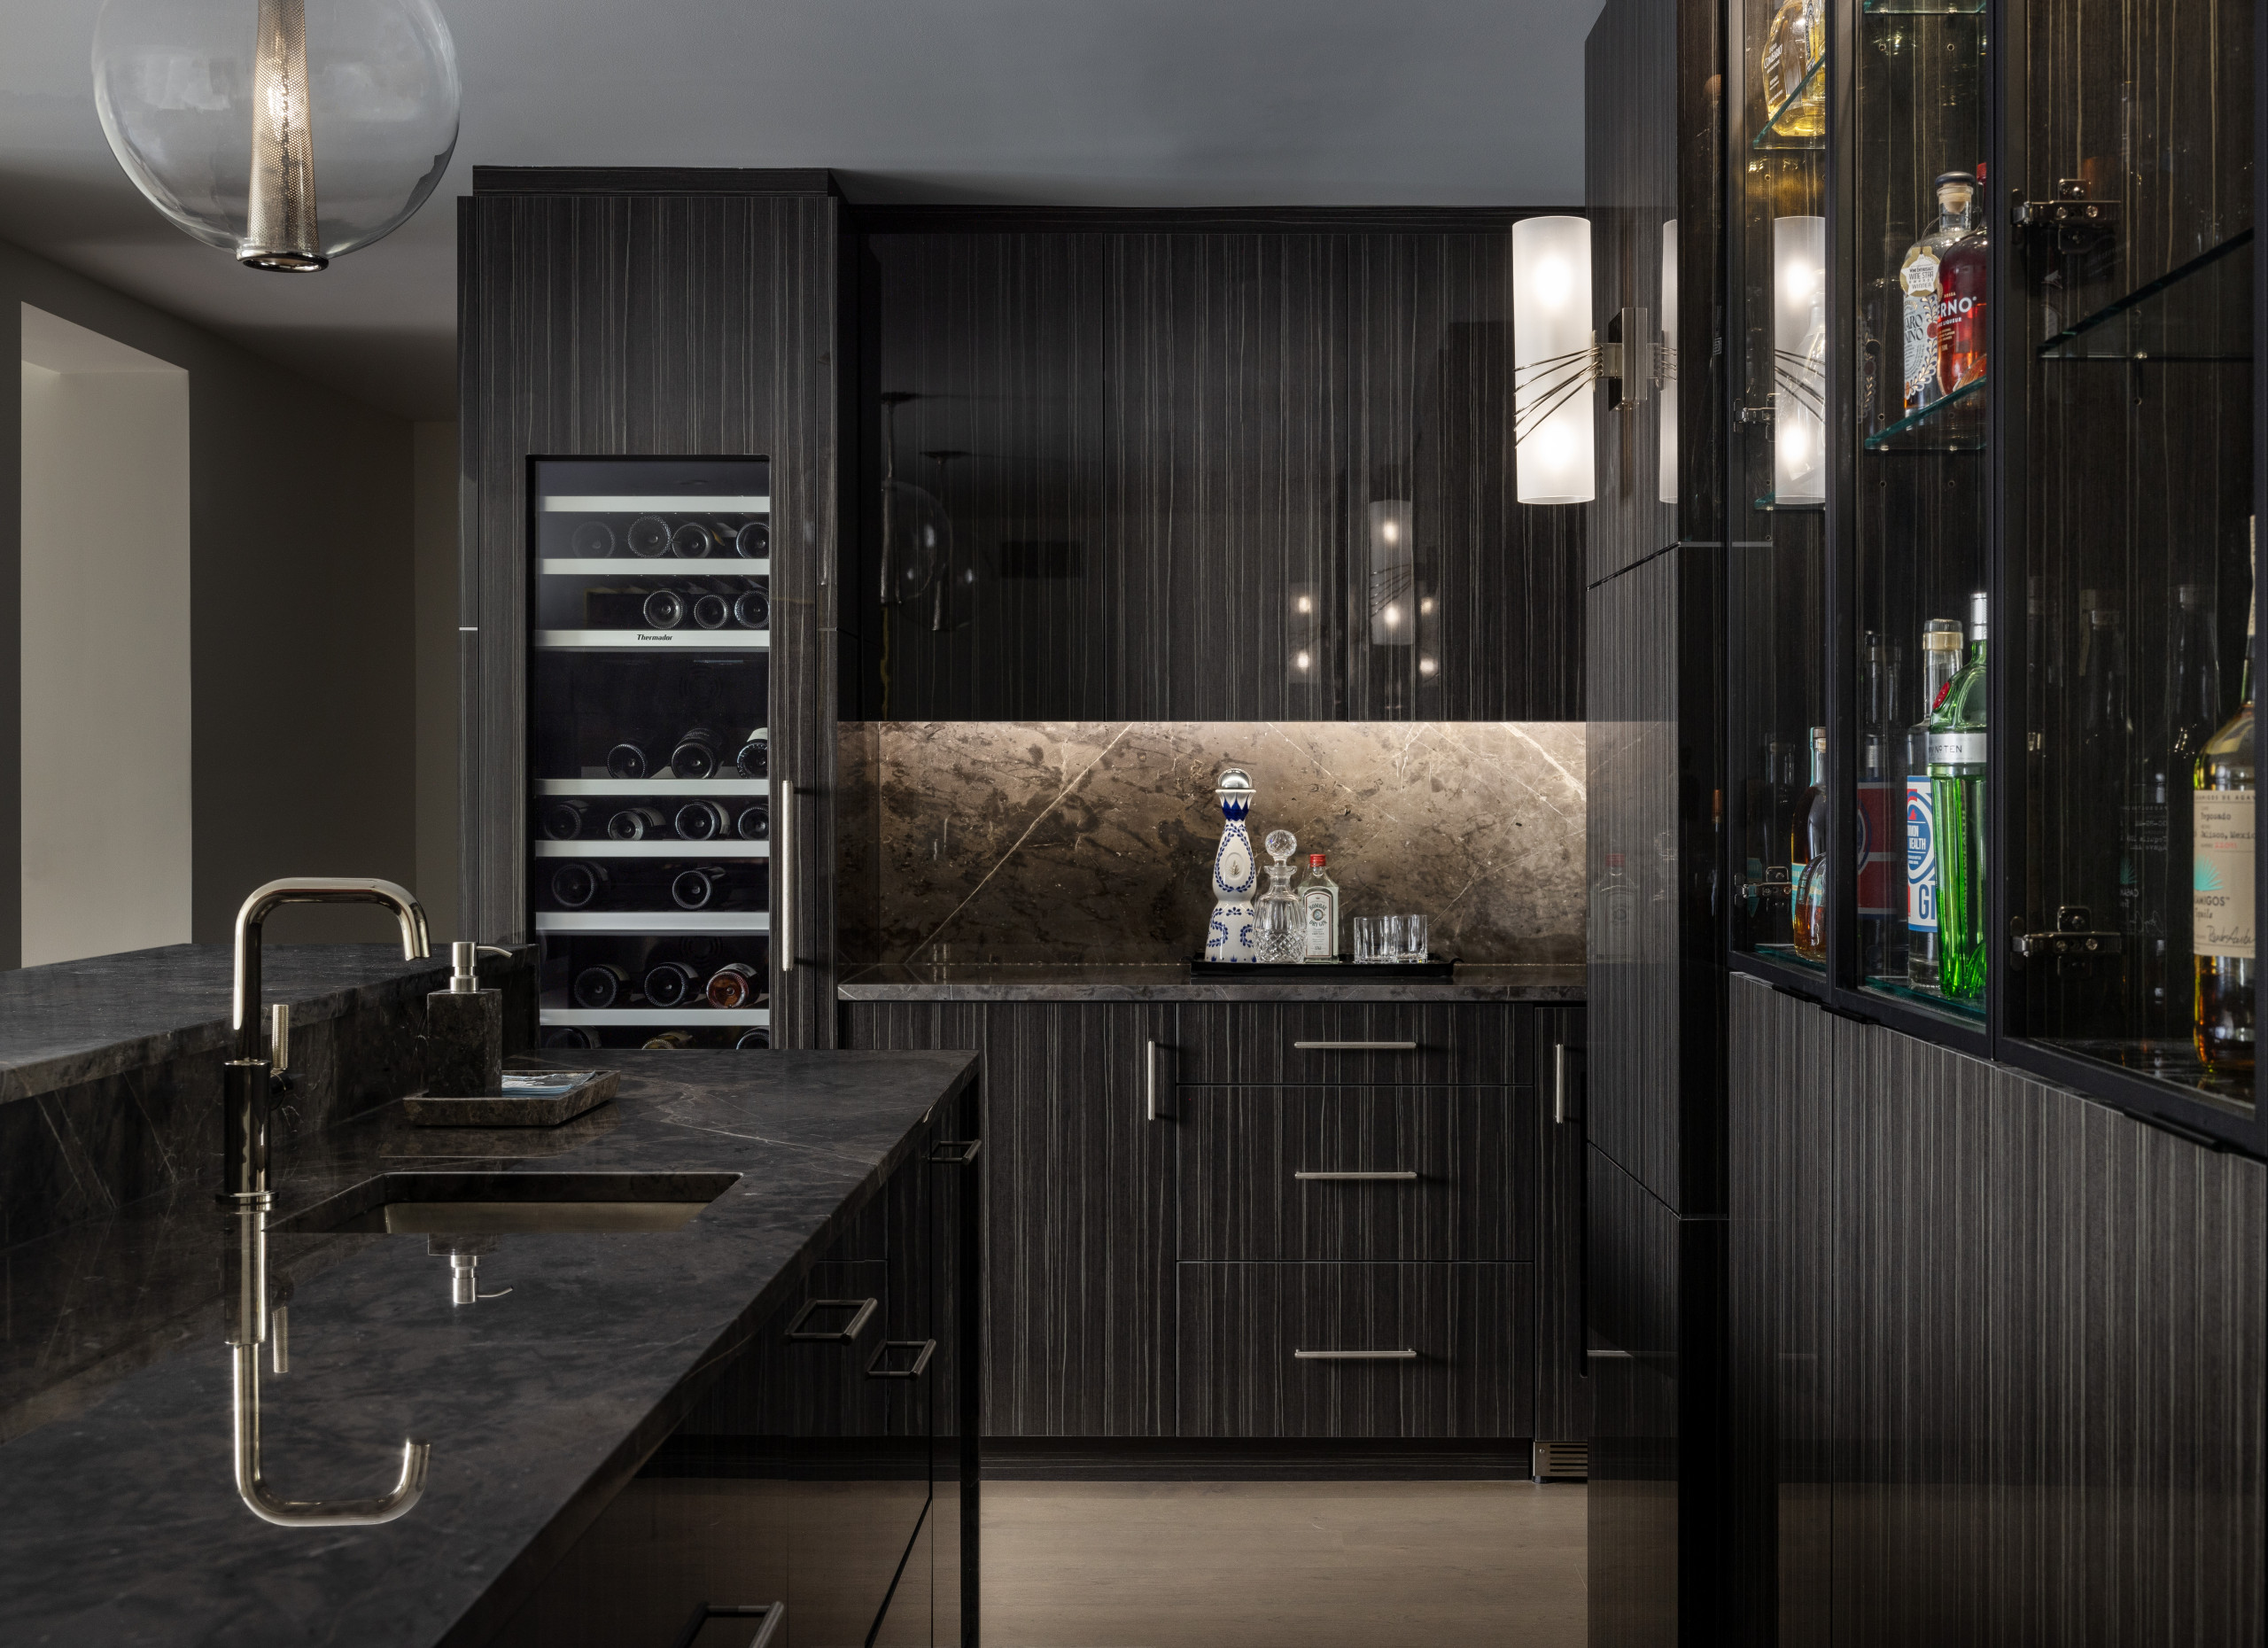 Kitchen and Bar - A Dream in Deco